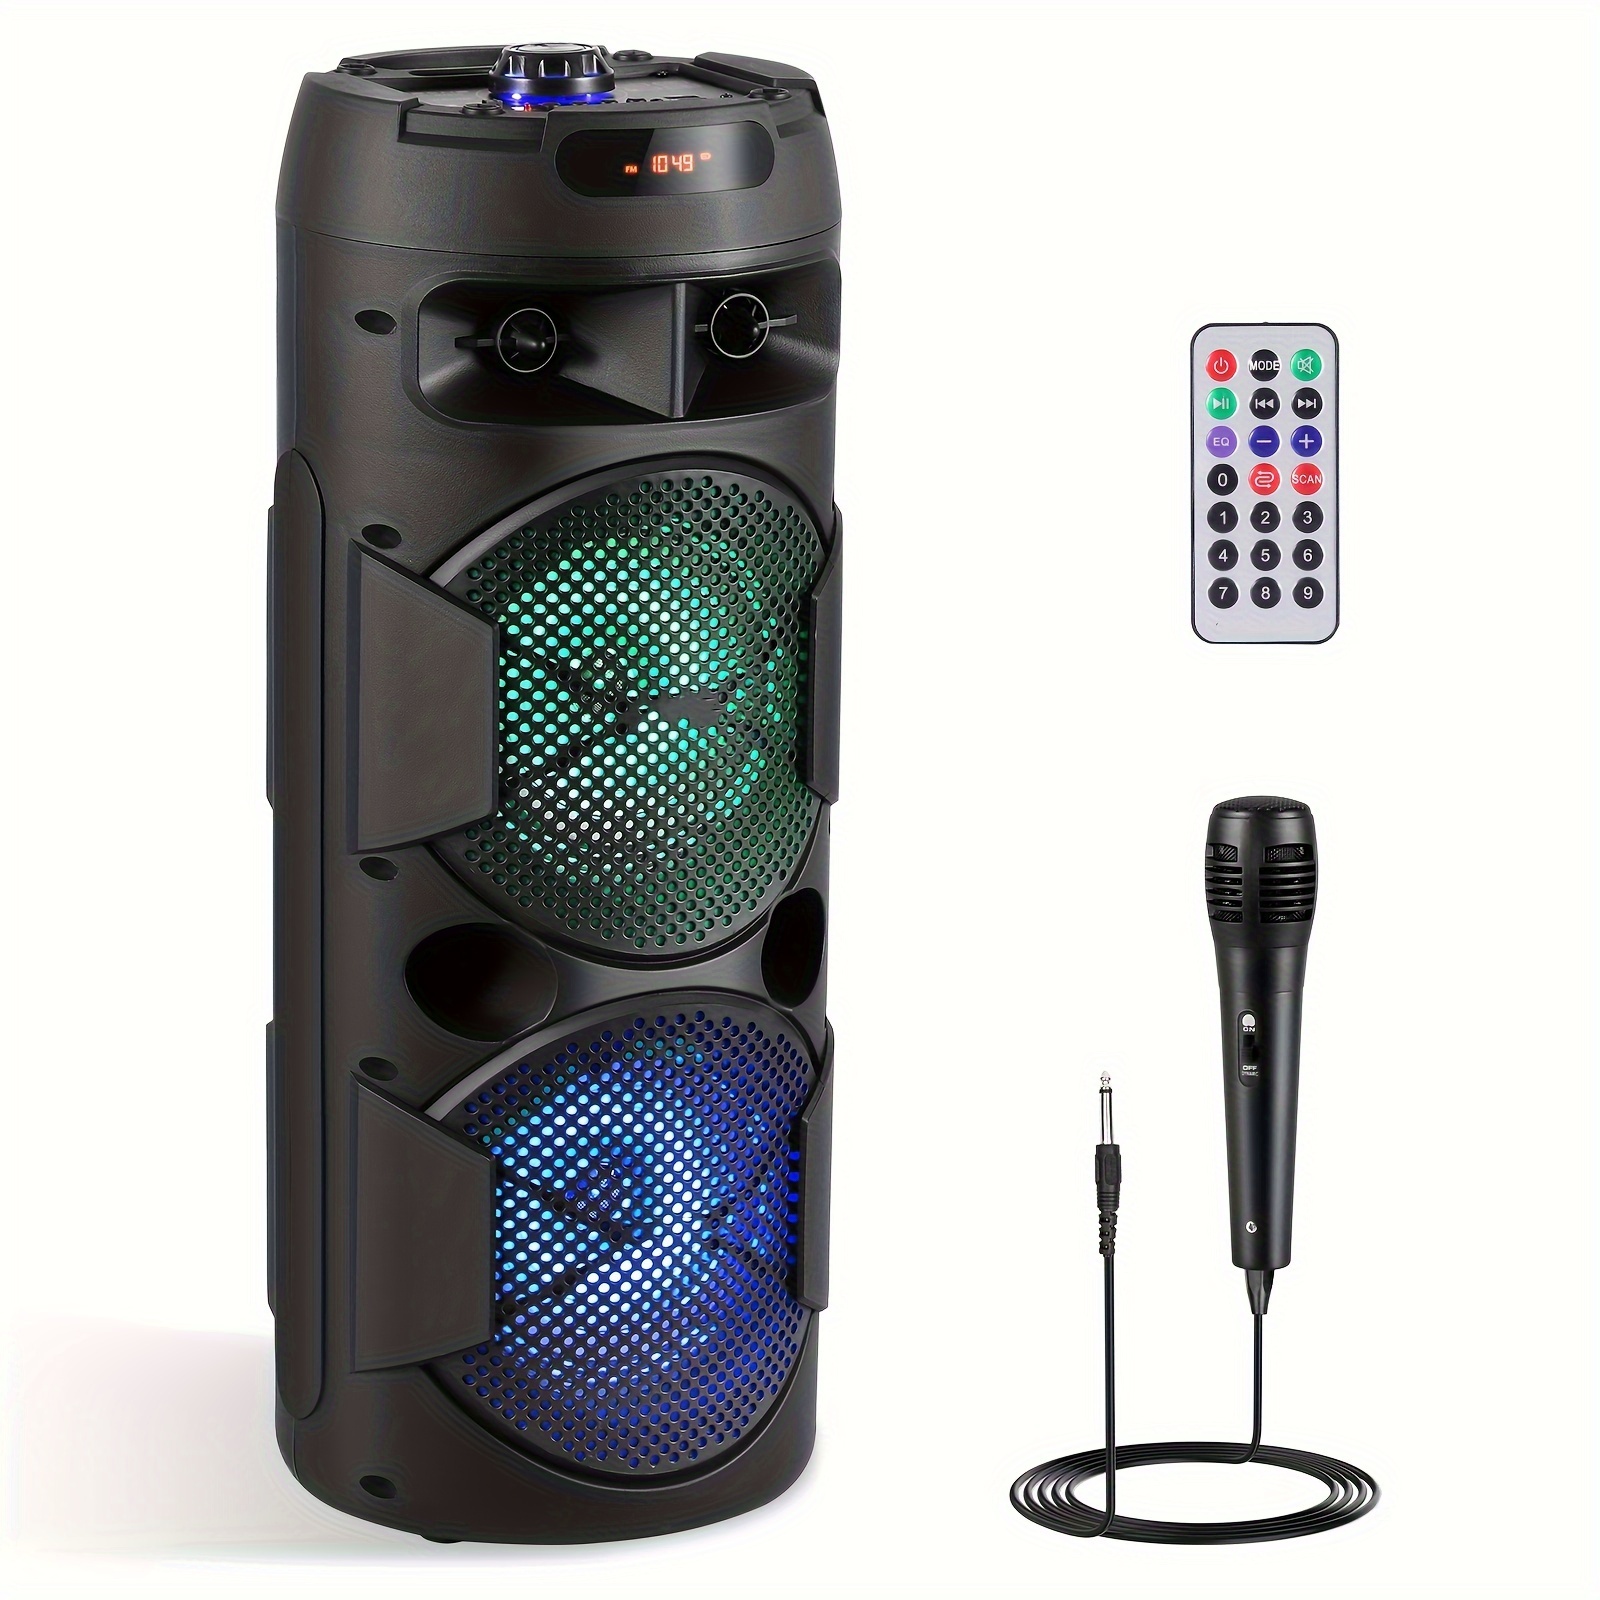 

Portable Bt Pa Speaker System, Rechargeable Outdoor Bt Speaker Portable Pa System With Dual 6.5" Subwoofer Wired Microphone, Party Lights, Remote Control, Support Usb Fm Aux Audio Input